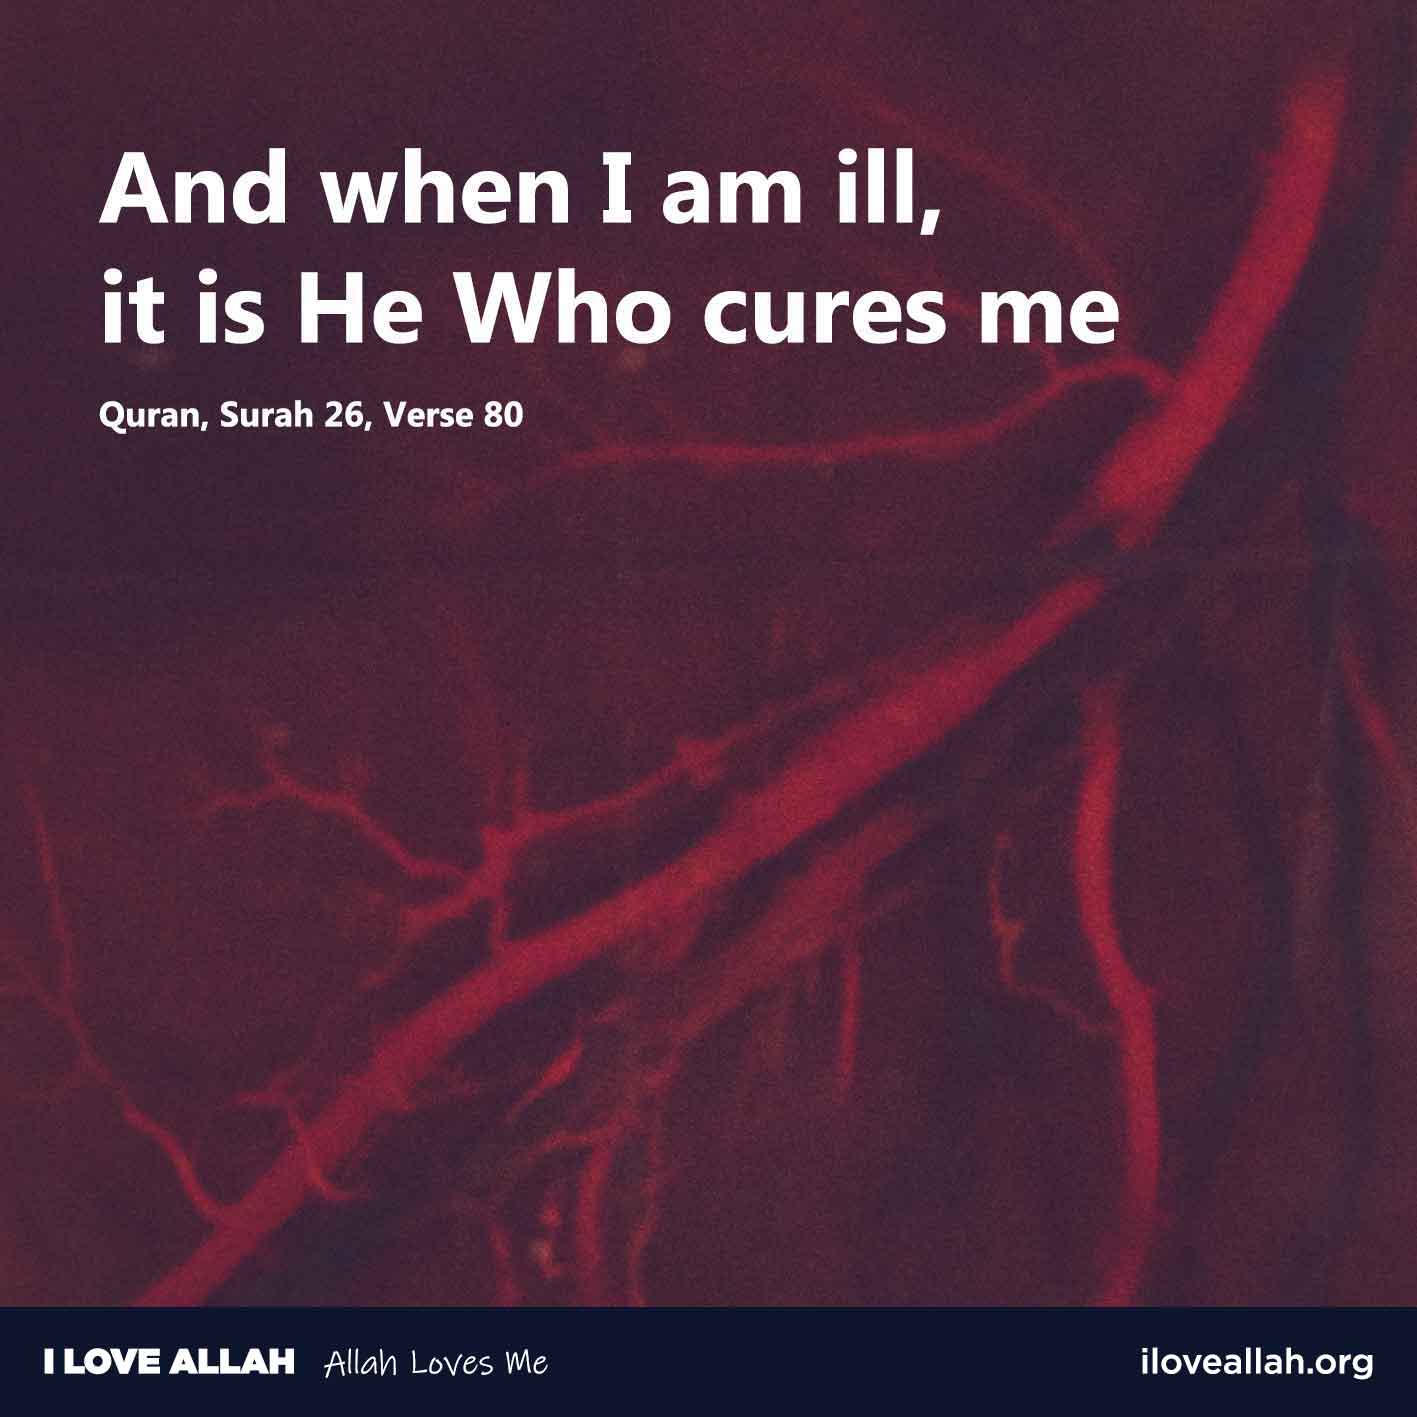 I Love Allah - And when I am ill it is He Who cures me-Quran-Surah 26 Verse 80